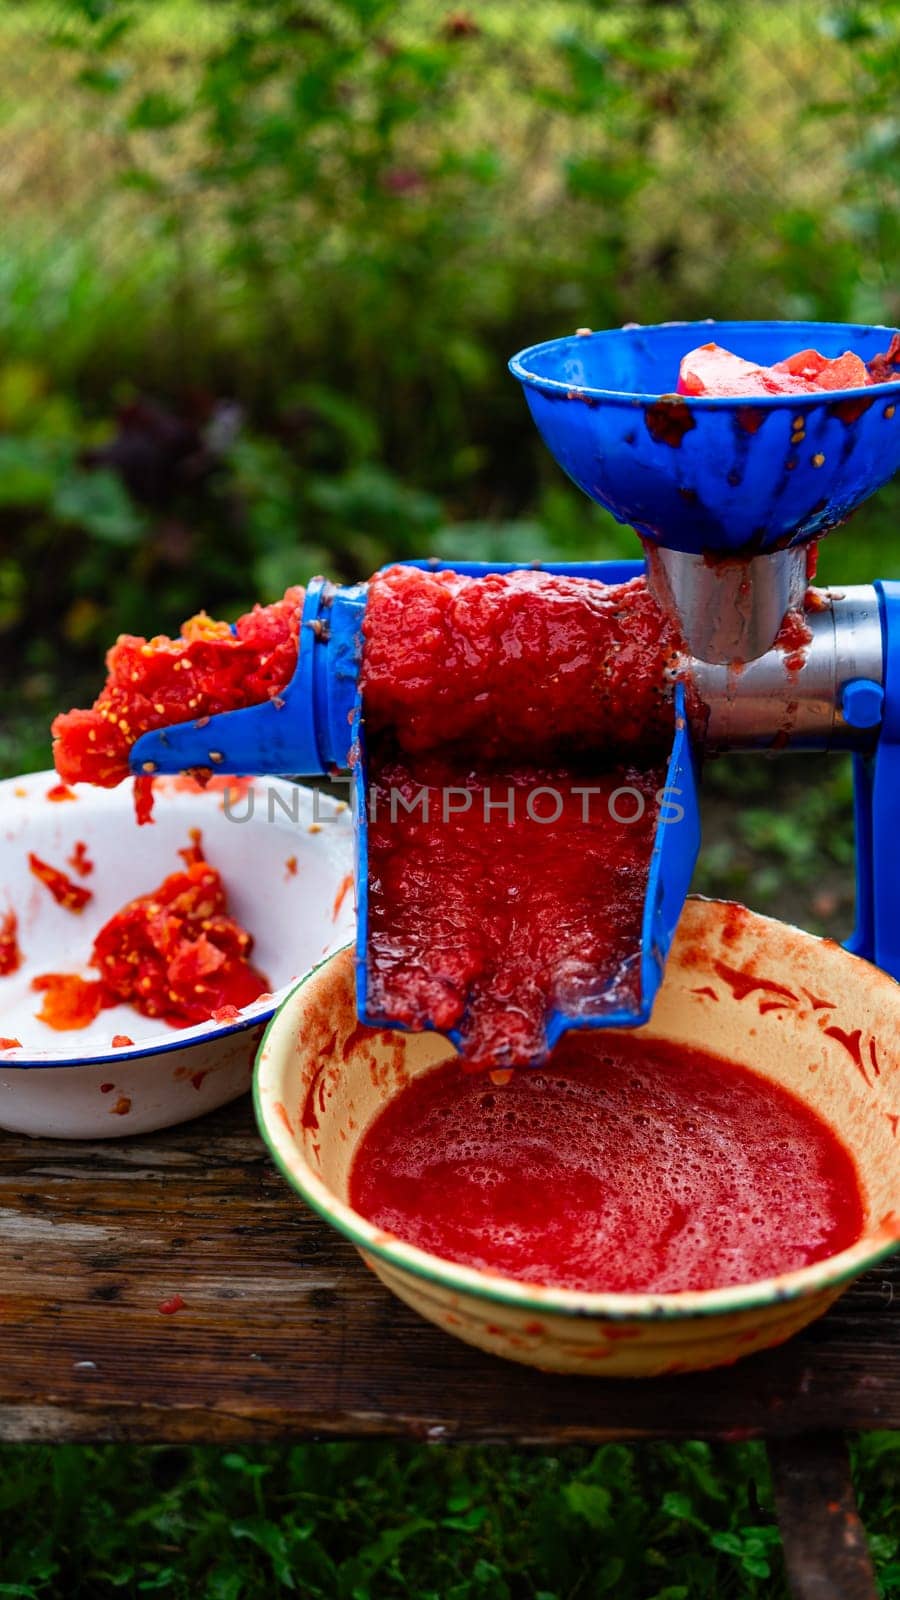 Close up photo of a manual tomato-grinder. Fresh tomatoes, for preparing handmade tomato paste.